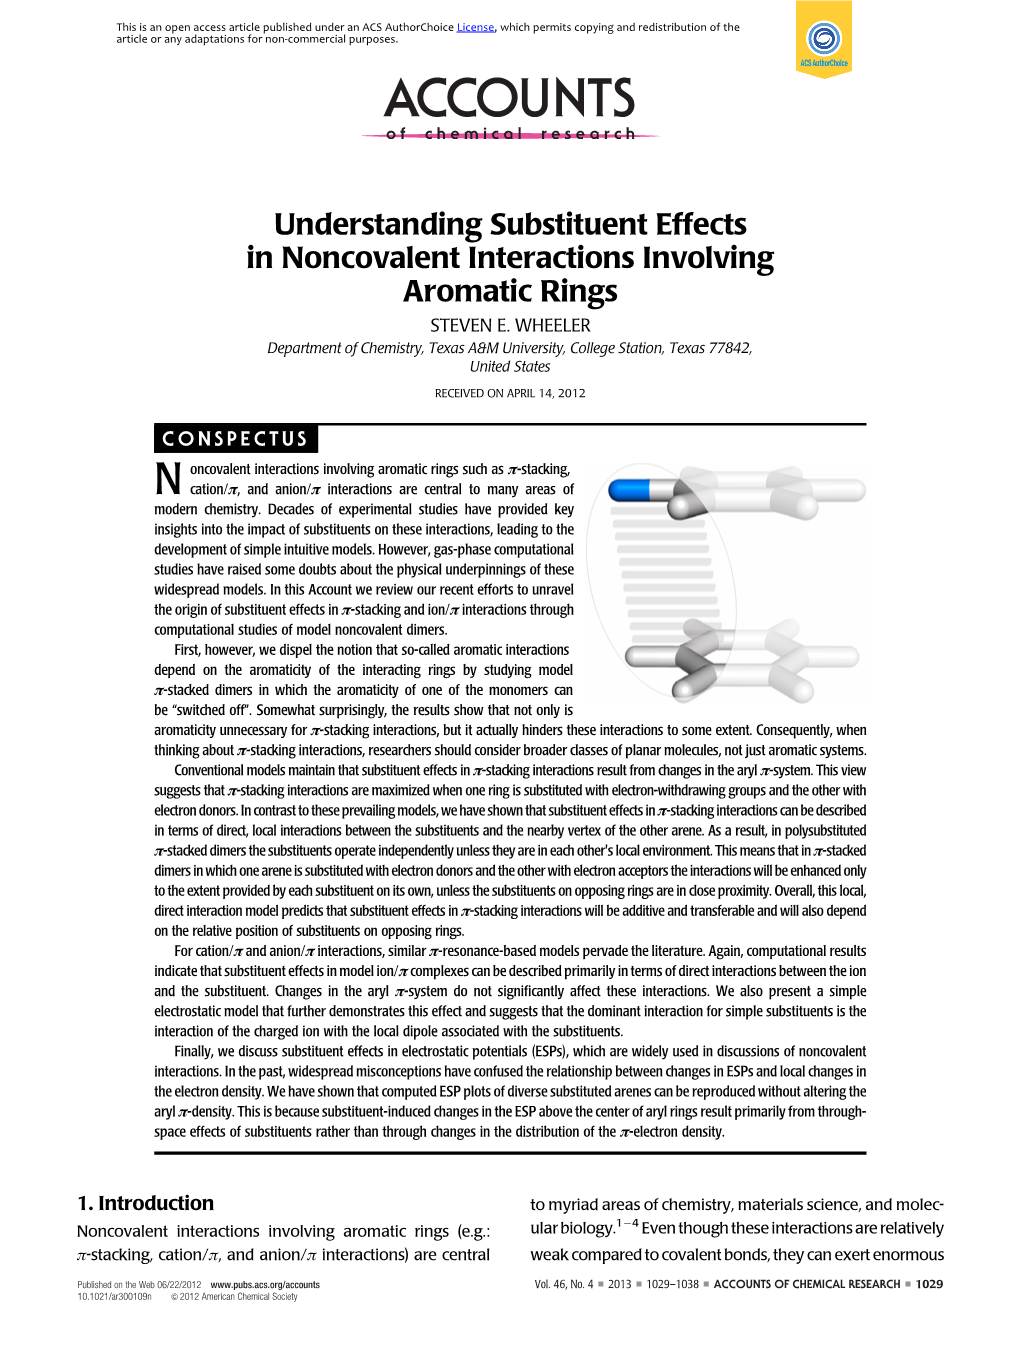 Understanding Substituent Effects in Noncovalent Interactions Involving Aromatic Rings STEVEN E